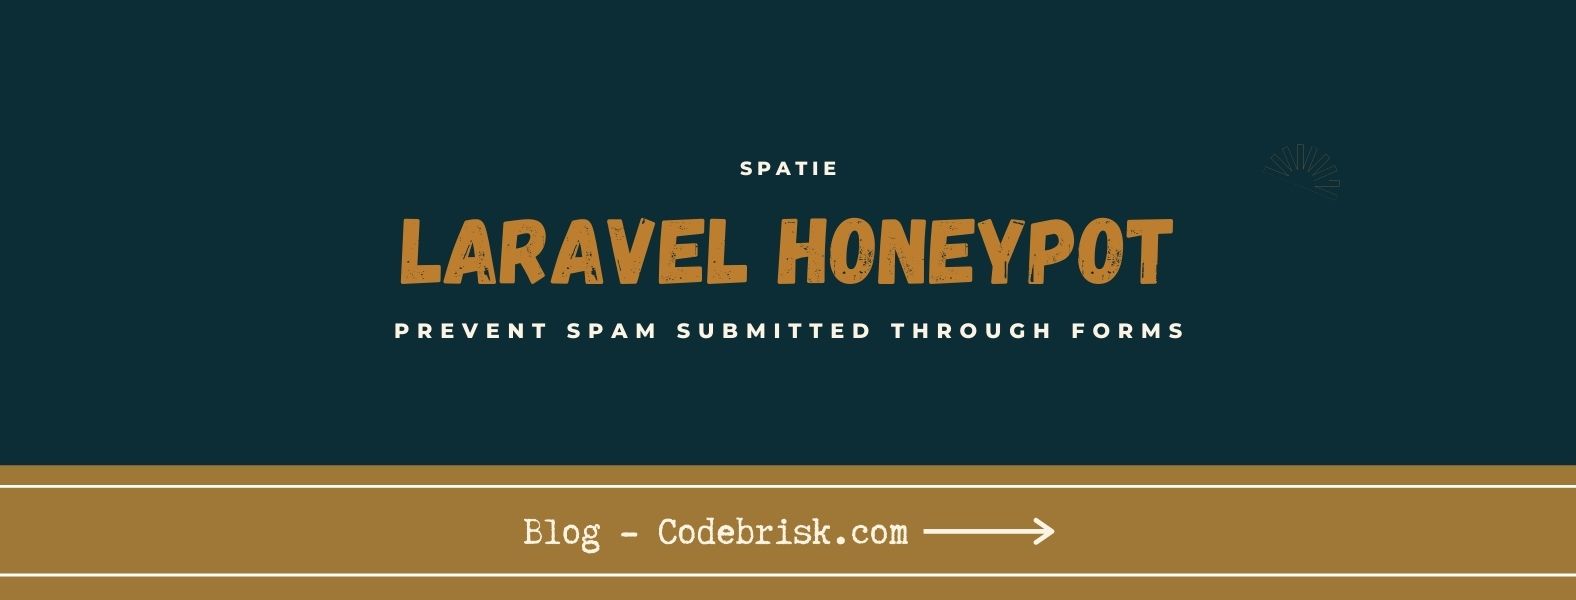 Laravel Honeypot - Prevent spam submitted through forms